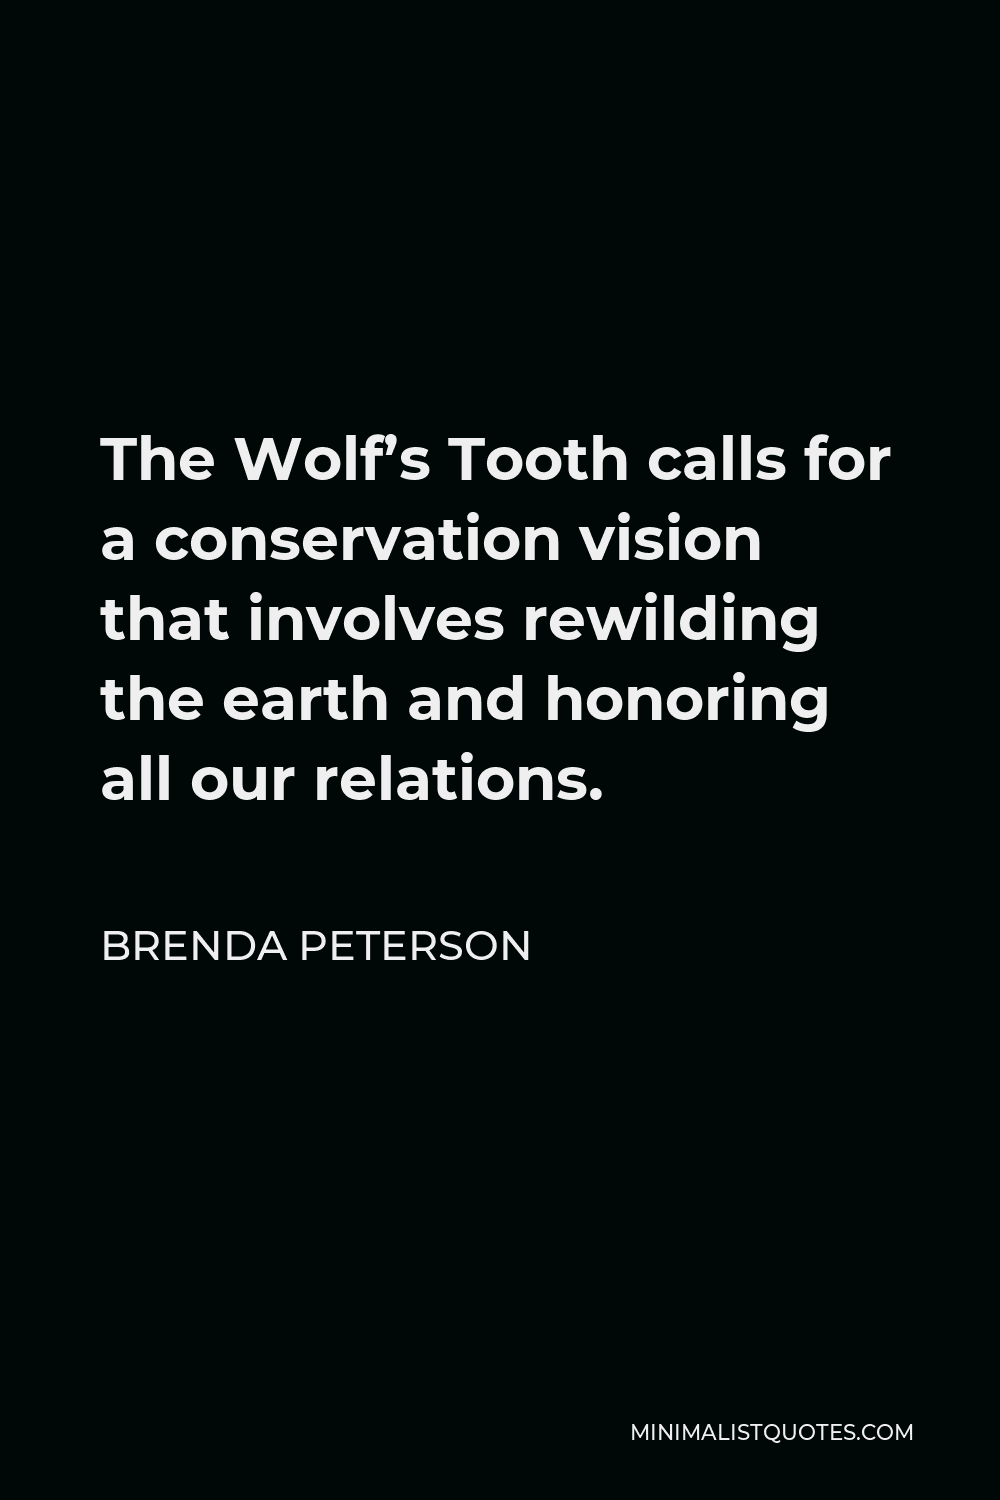 Brenda Peterson Quote - The Wolf’s Tooth calls for a conservation vision that involves rewilding the earth and honoring all our relations.